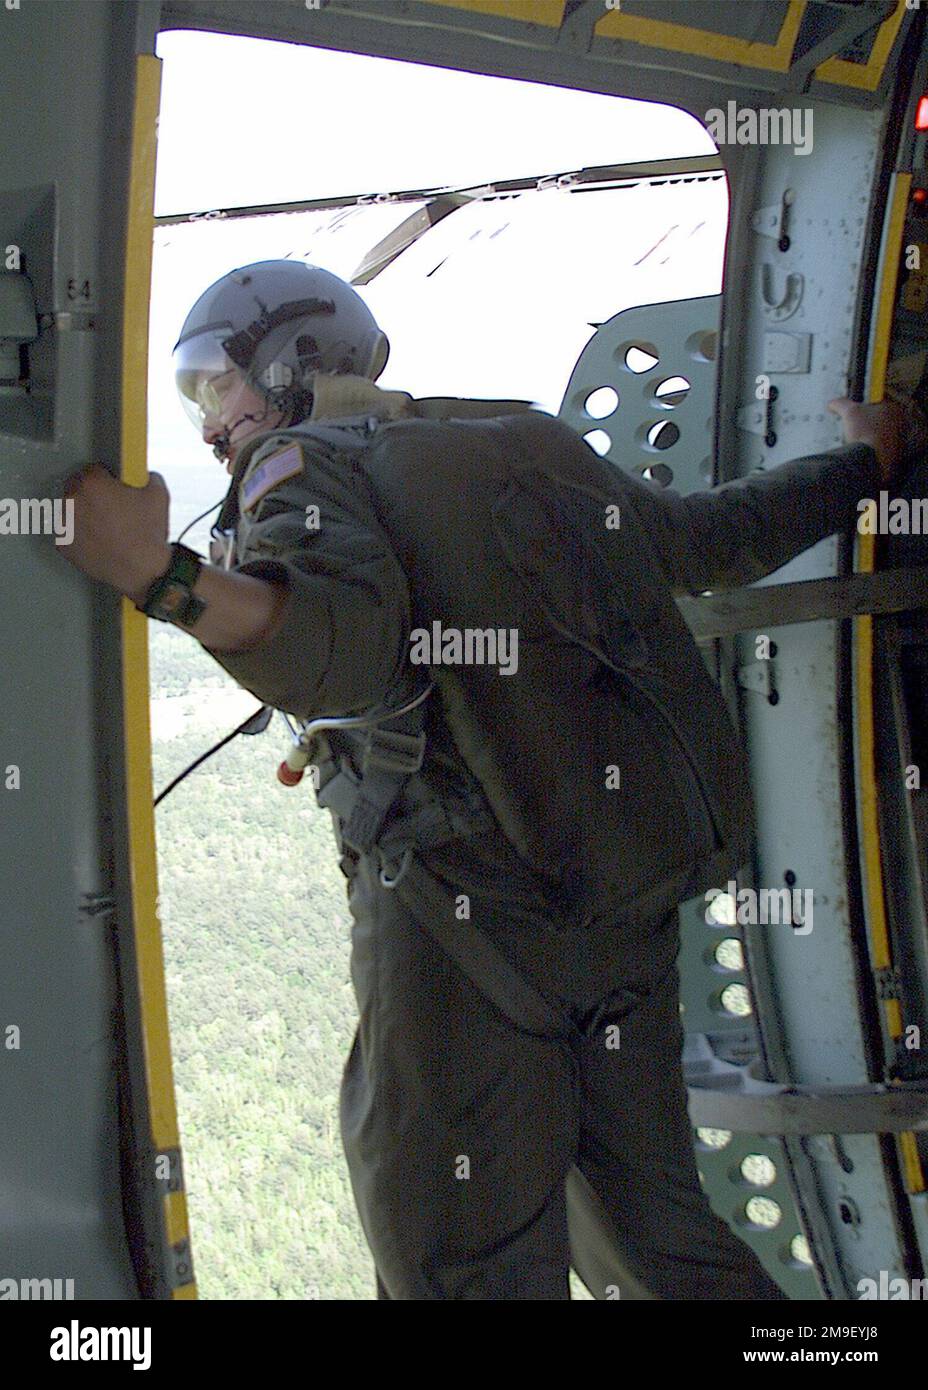 SENIOR AIRMAN Pete Hetherington, USAF, Loadmaster, 6th Airlift Squadron, McGuire Air Force Base, New Jersey, standing in the open door of a C-141B Starlifter checking drop zone conditions before paratroopers of the 82nd Airborne Division, Fort Bragg, North Carolina make their jump. The mission called for the insertion of 1200 Airborne troops from the 82nd onto the drop zone at Fort Polk, Louisiana. The exercise, called Large Package Week involves the airdropping of paratroopers from the 82nd Airborne and their heavy equipment onto the drop zone. Large Package Week is a quarterly training exerc Stock Photo